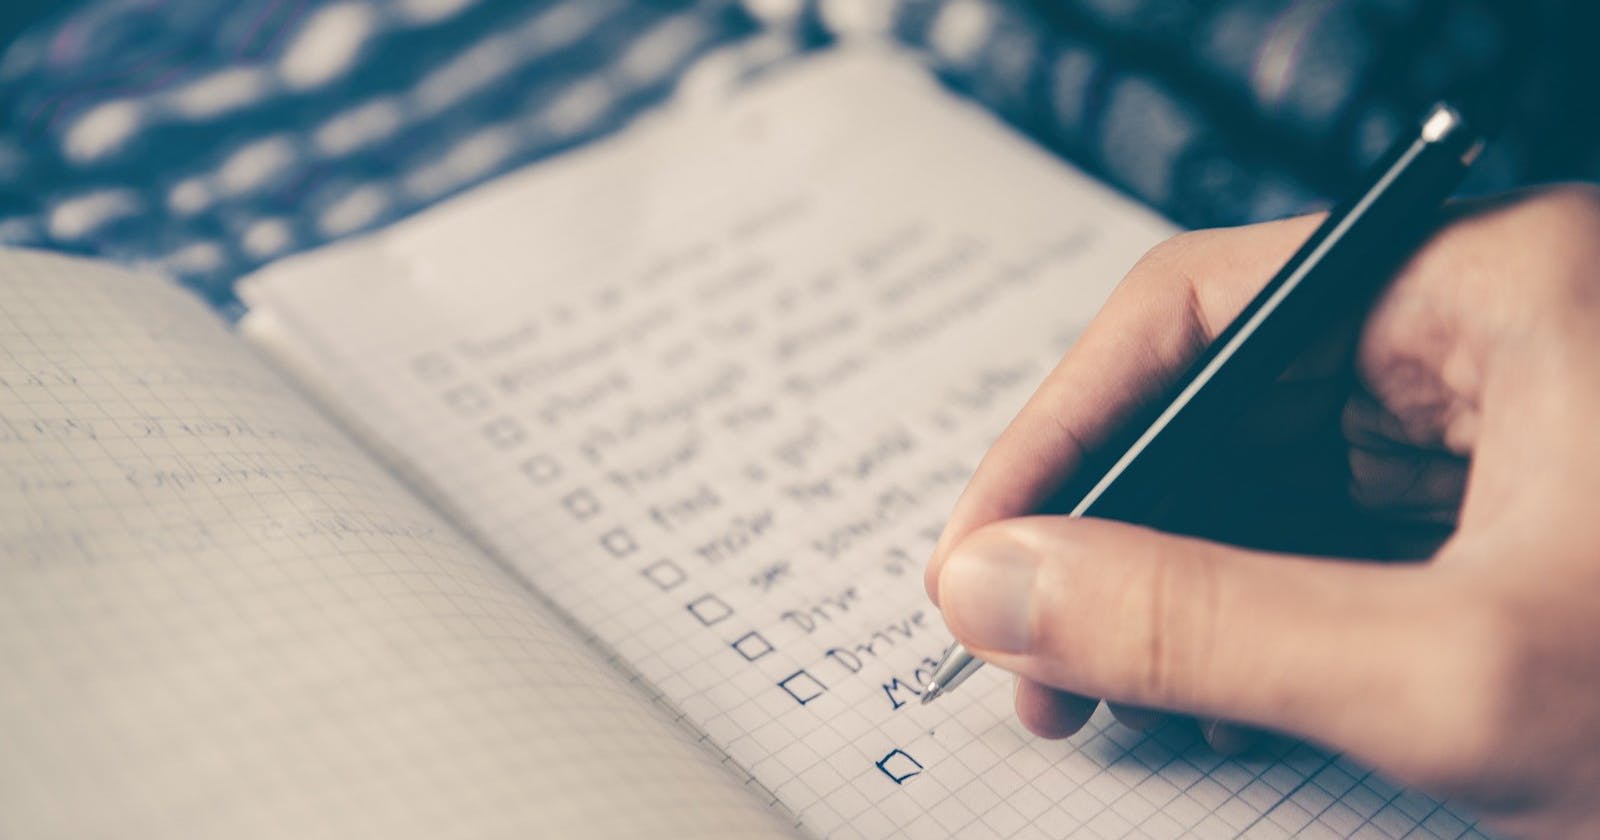 The Definitive Checklist Before Releasing A Website